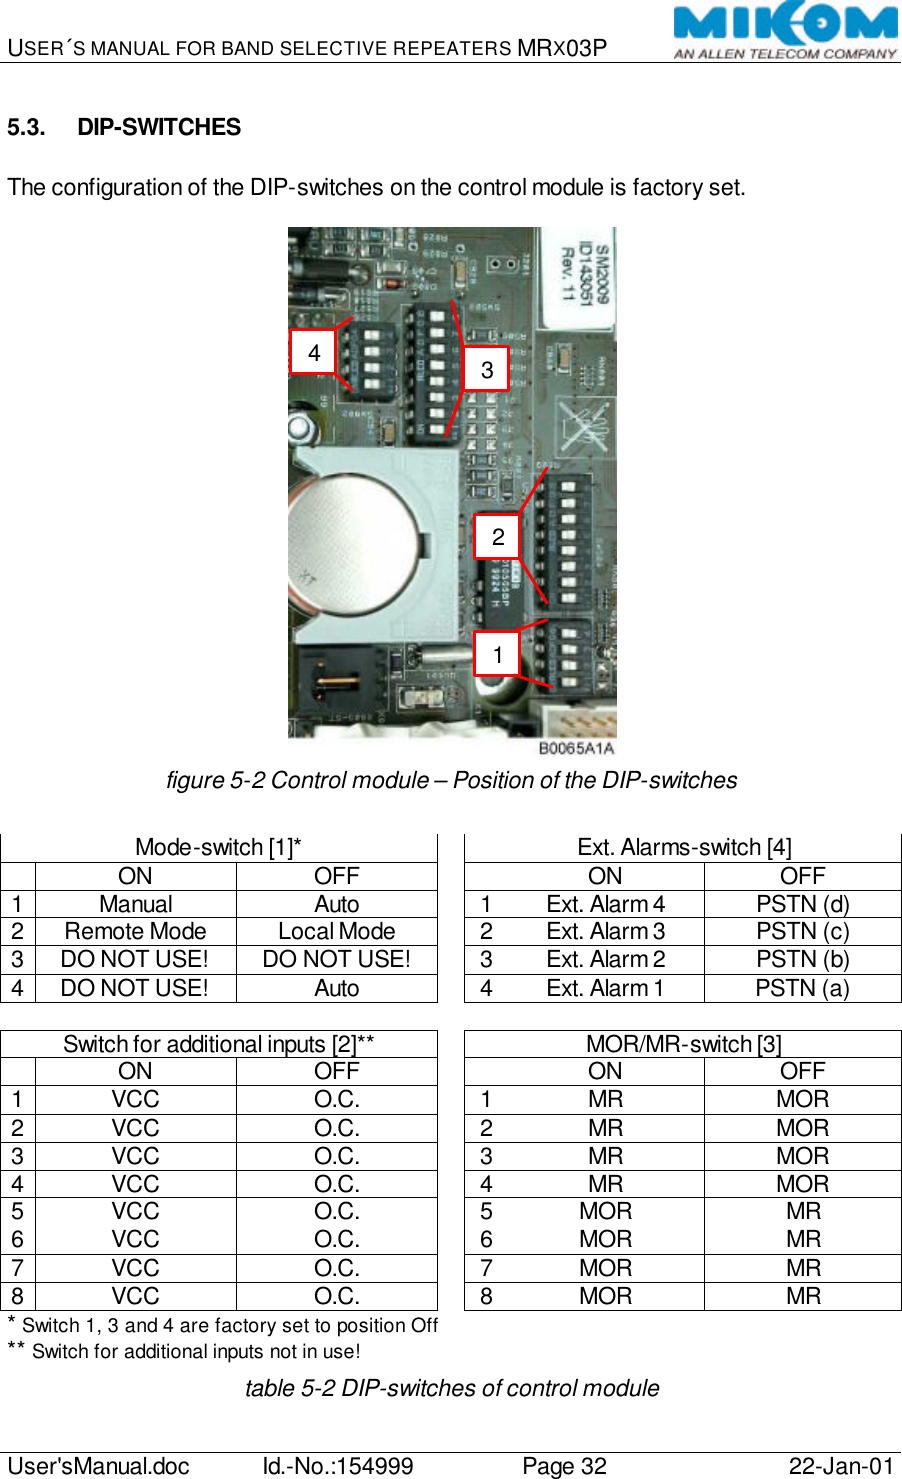 USER´S MANUAL FOR BAND SELECTIVE REPEATERS MRX03P   User&apos;sManual.doc Id.-No.:154999 Page 32 22-Jan-01  5.3. DIP-SWITCHES  The configuration of the DIP-switches on the control module is factory set.   figure 5-2 Control module – Position of the DIP-switches  Mode-switch [1]*  Ext. Alarms-switch [4]  ON OFF   ON OFF 1 Manual Auto  1 Ext. Alarm 4 PSTN (d) 2 Remote Mode Local Mode  2 Ext. Alarm 3 PSTN (c) 3 DO NOT USE! DO NOT USE!  3 Ext. Alarm 2 PSTN (b) 4 DO NOT USE! Auto  4 Ext. Alarm 1 PSTN (a)            Switch for additional inputs [2]**  MOR/MR-switch [3]  ON OFF   ON OFF 1 VCC O.C.  1 MR MOR 2 VCC O.C.  2 MR MOR 3 VCC O.C.  3 MR MOR 4 VCC O.C.  4 MR MOR 5 VCC O.C.  5 MOR MR 6 VCC O.C.  6 MOR MR 7 VCC O.C.  7 MOR MR 8 VCC O.C.  8 MOR MR * Switch 1, 3 and 4 are factory set to position Off ** Switch for additional inputs not in use! table 5-2 DIP-switches of control module 1234